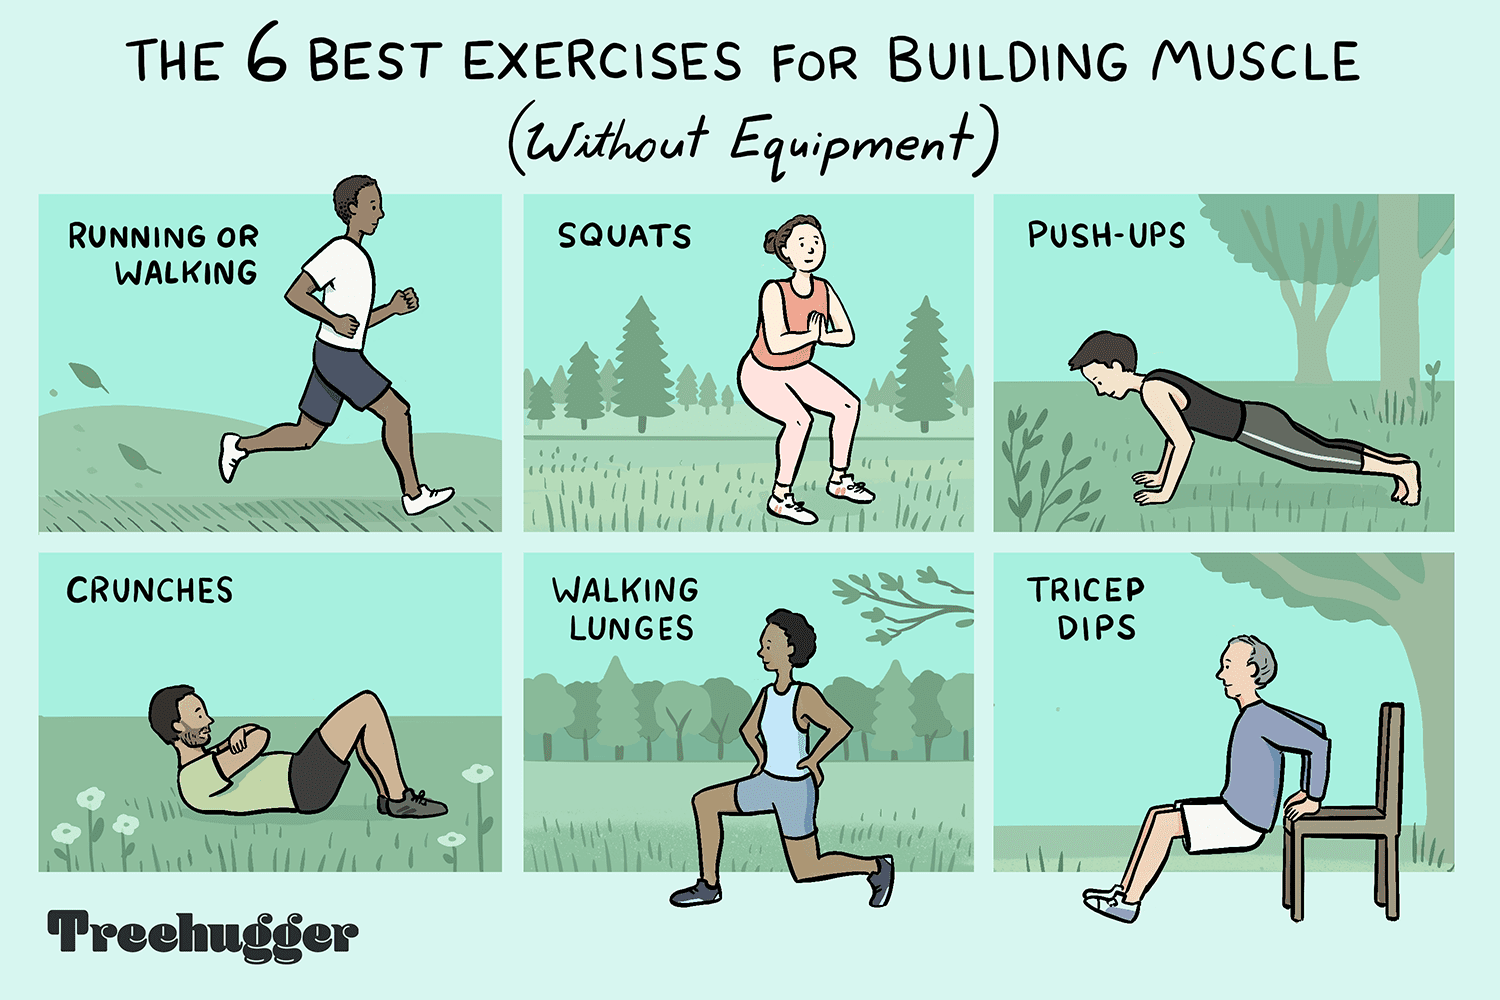 6 Exercises for Building Muscle Without Equipment